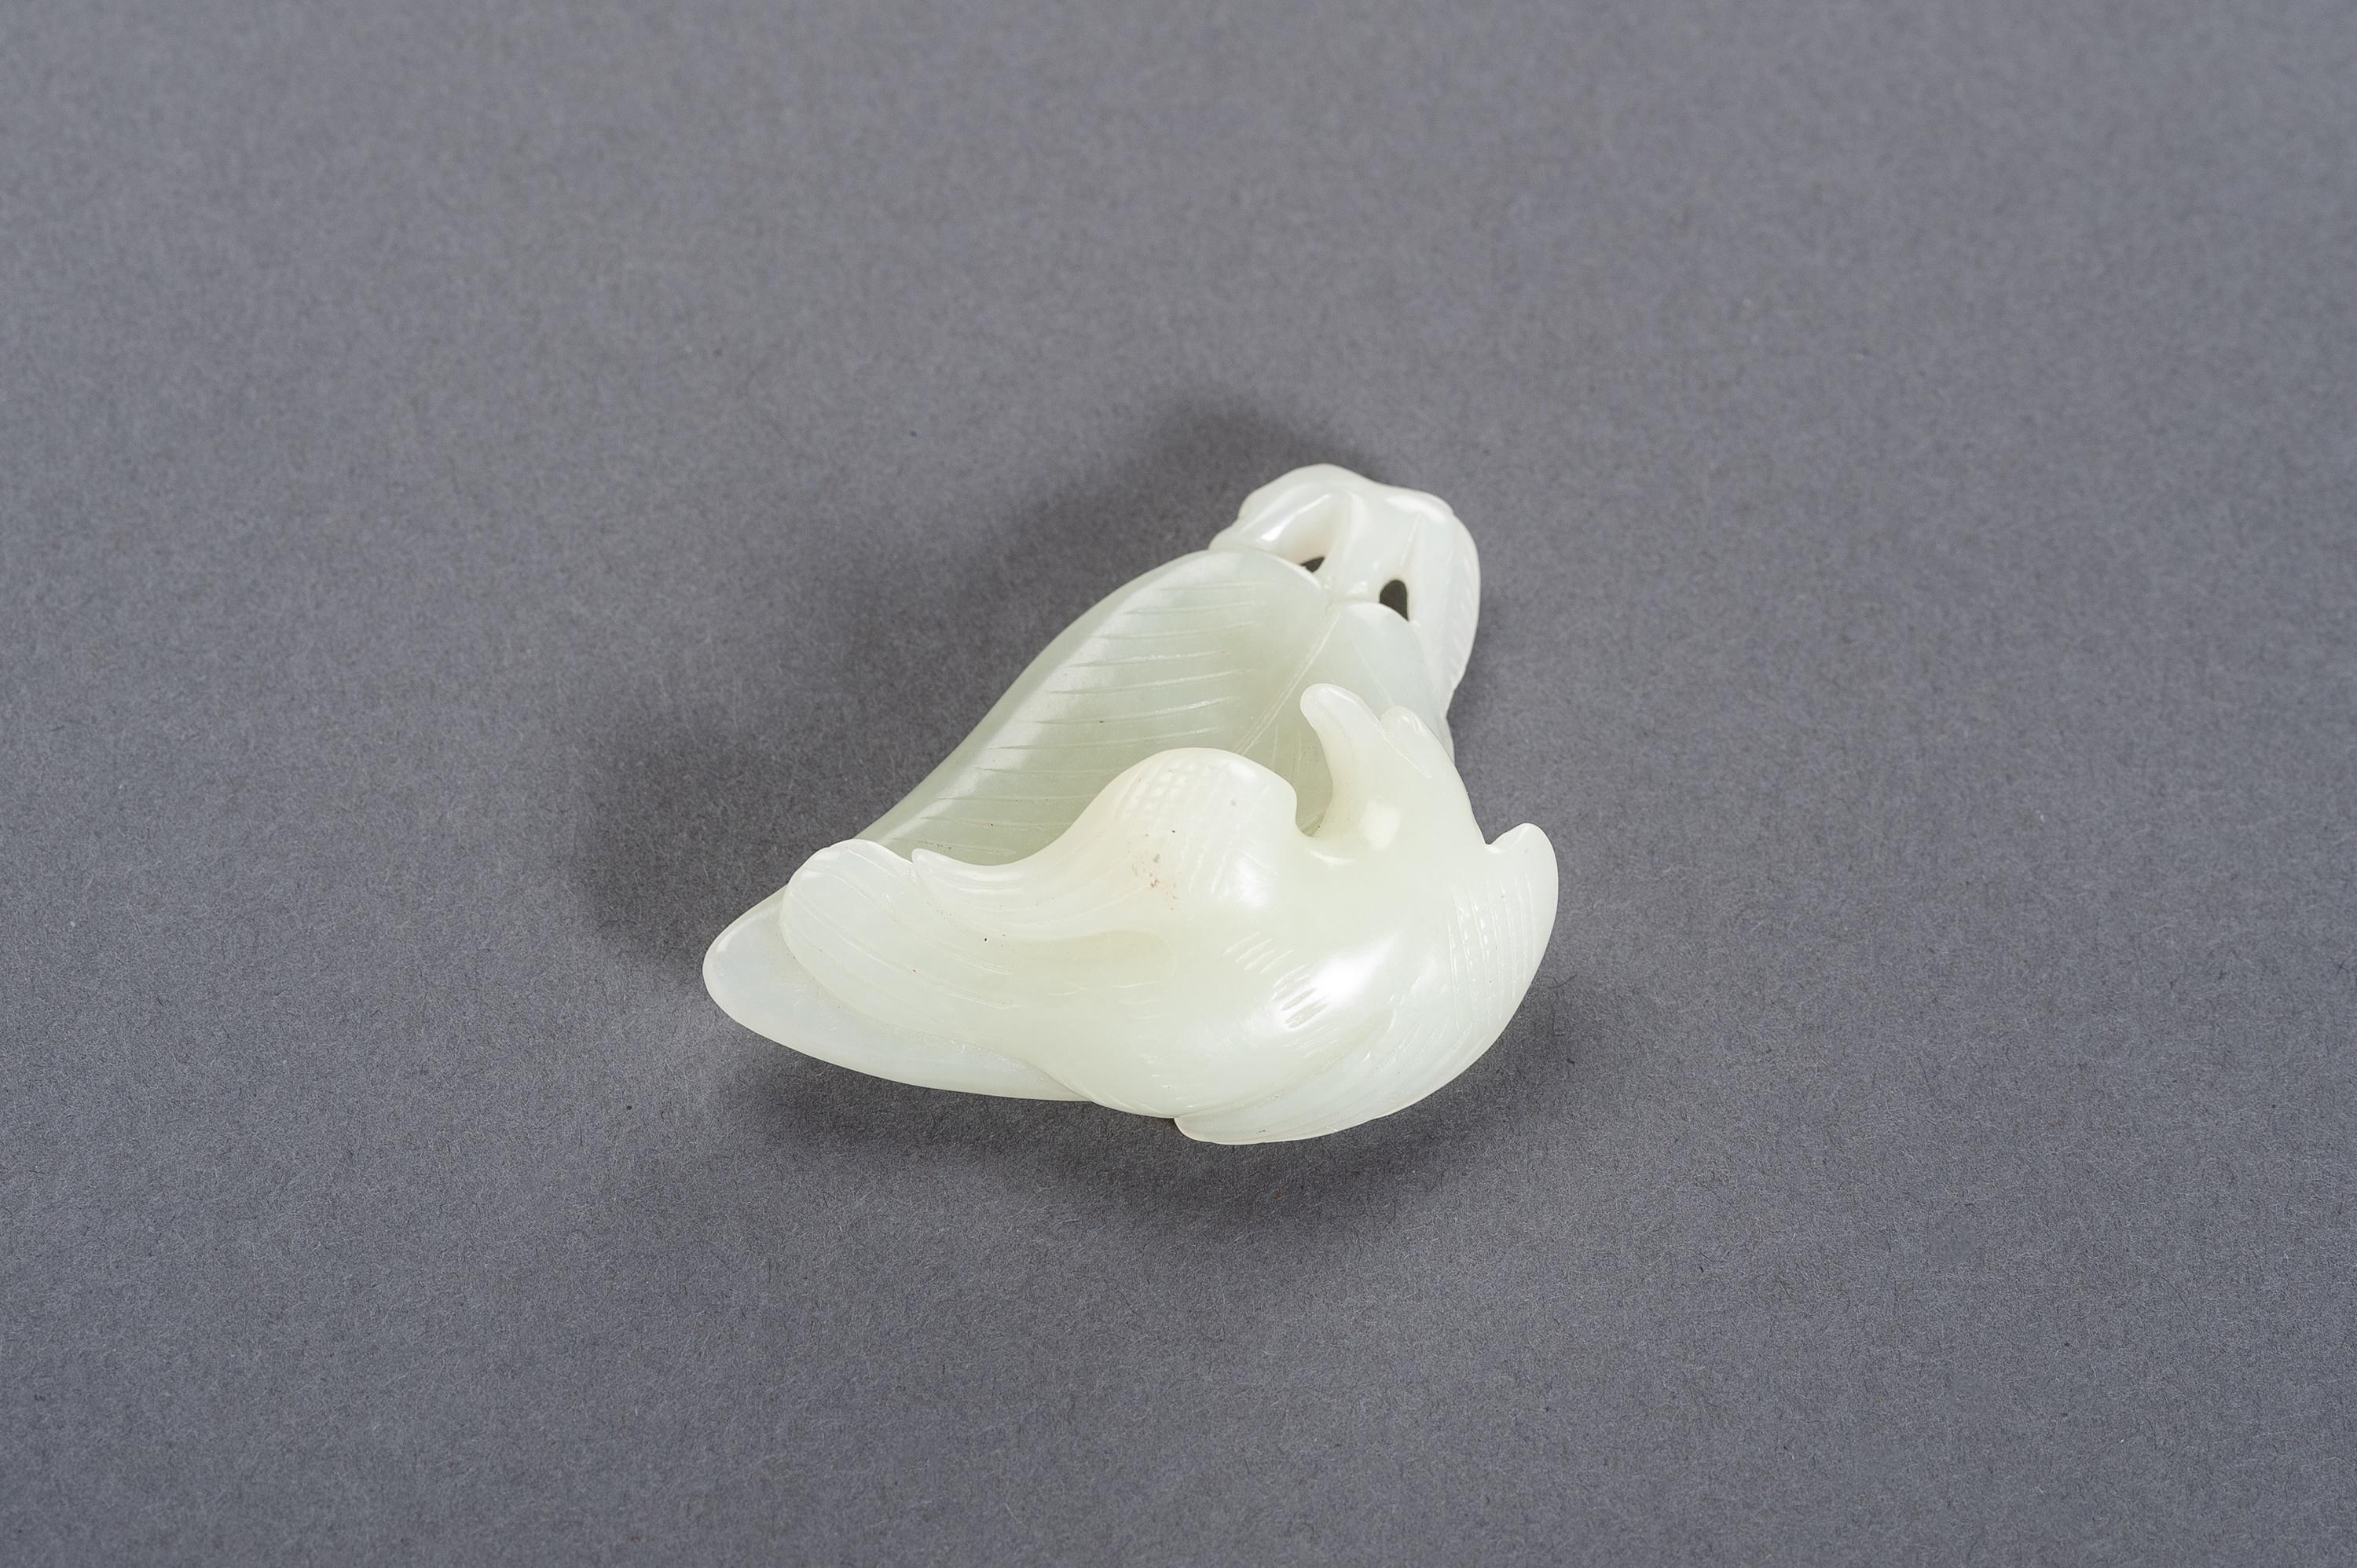 A celadon jade 'Bird of Prey on Leaf' pendant, China, Late Qing Dynasty (1644-1912) to Republic Period (1912-1949)

Carved as a bird of prey with incised wings and sharply curved beak resting on a large leaf, two spaces between the stem and leaf